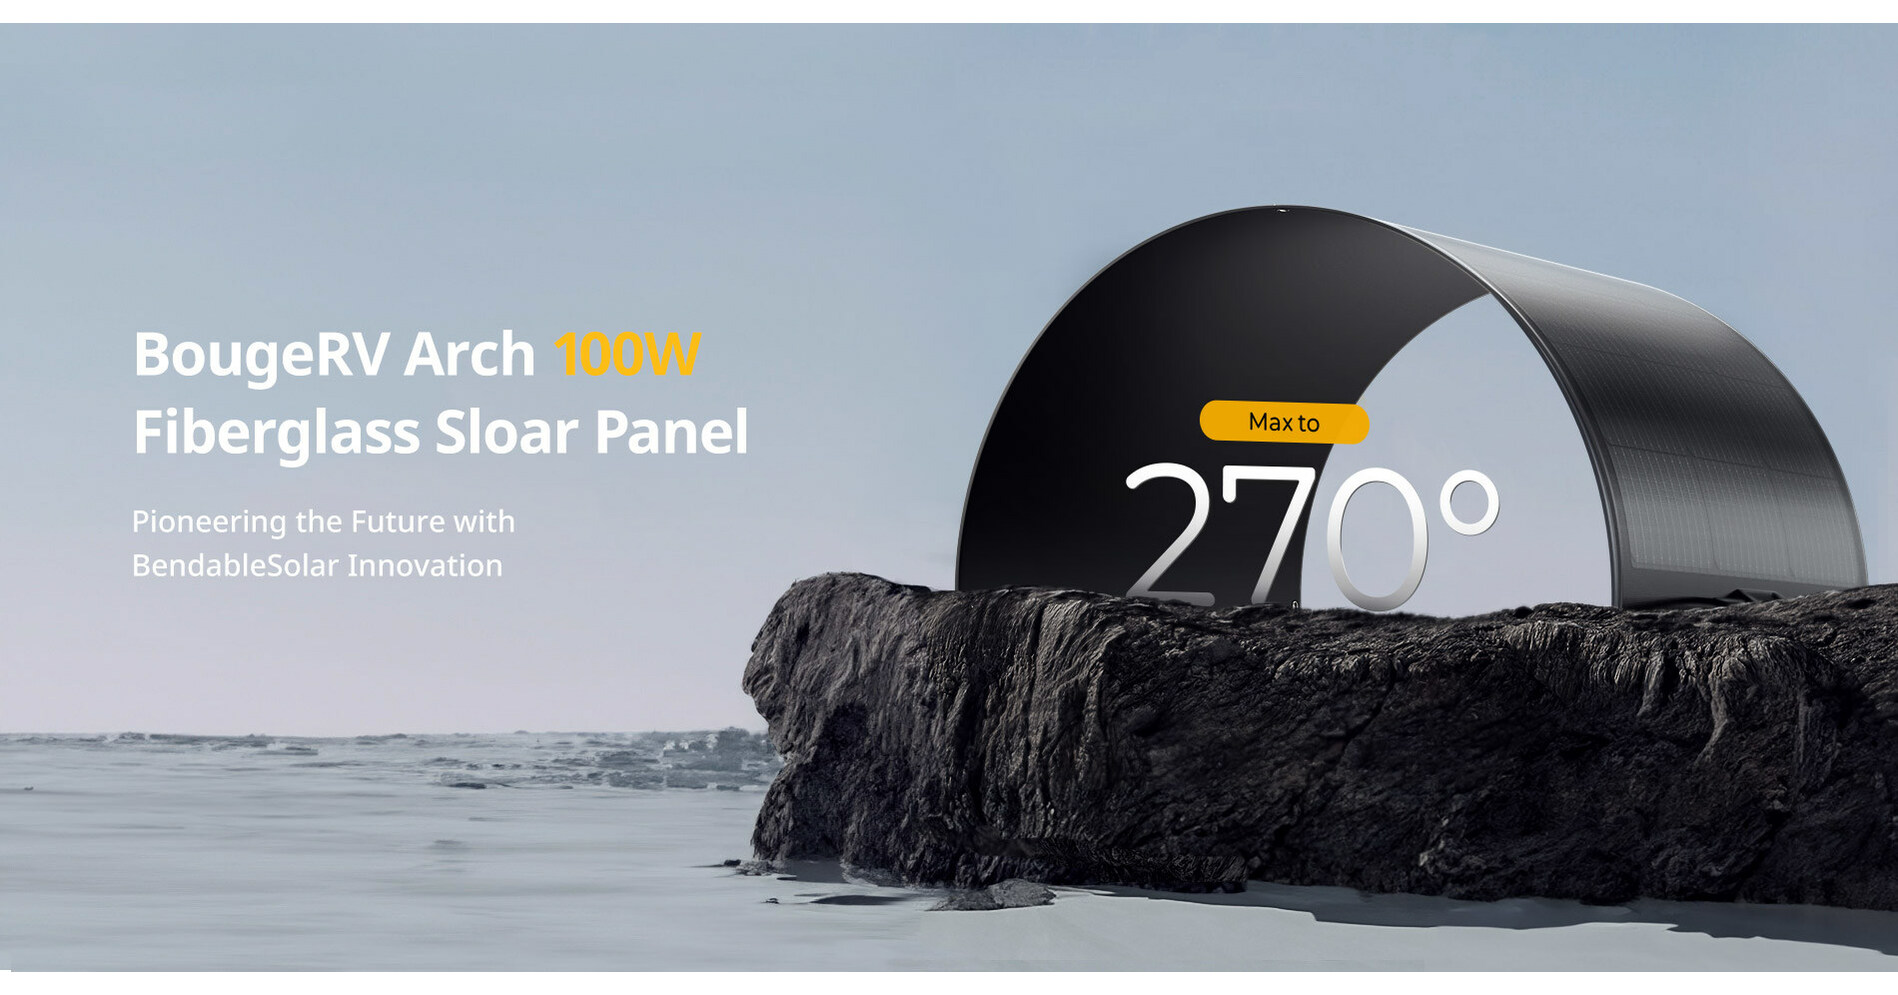 BougeRV Arch launches new Max 270° bendable fiberglass Solar Panel